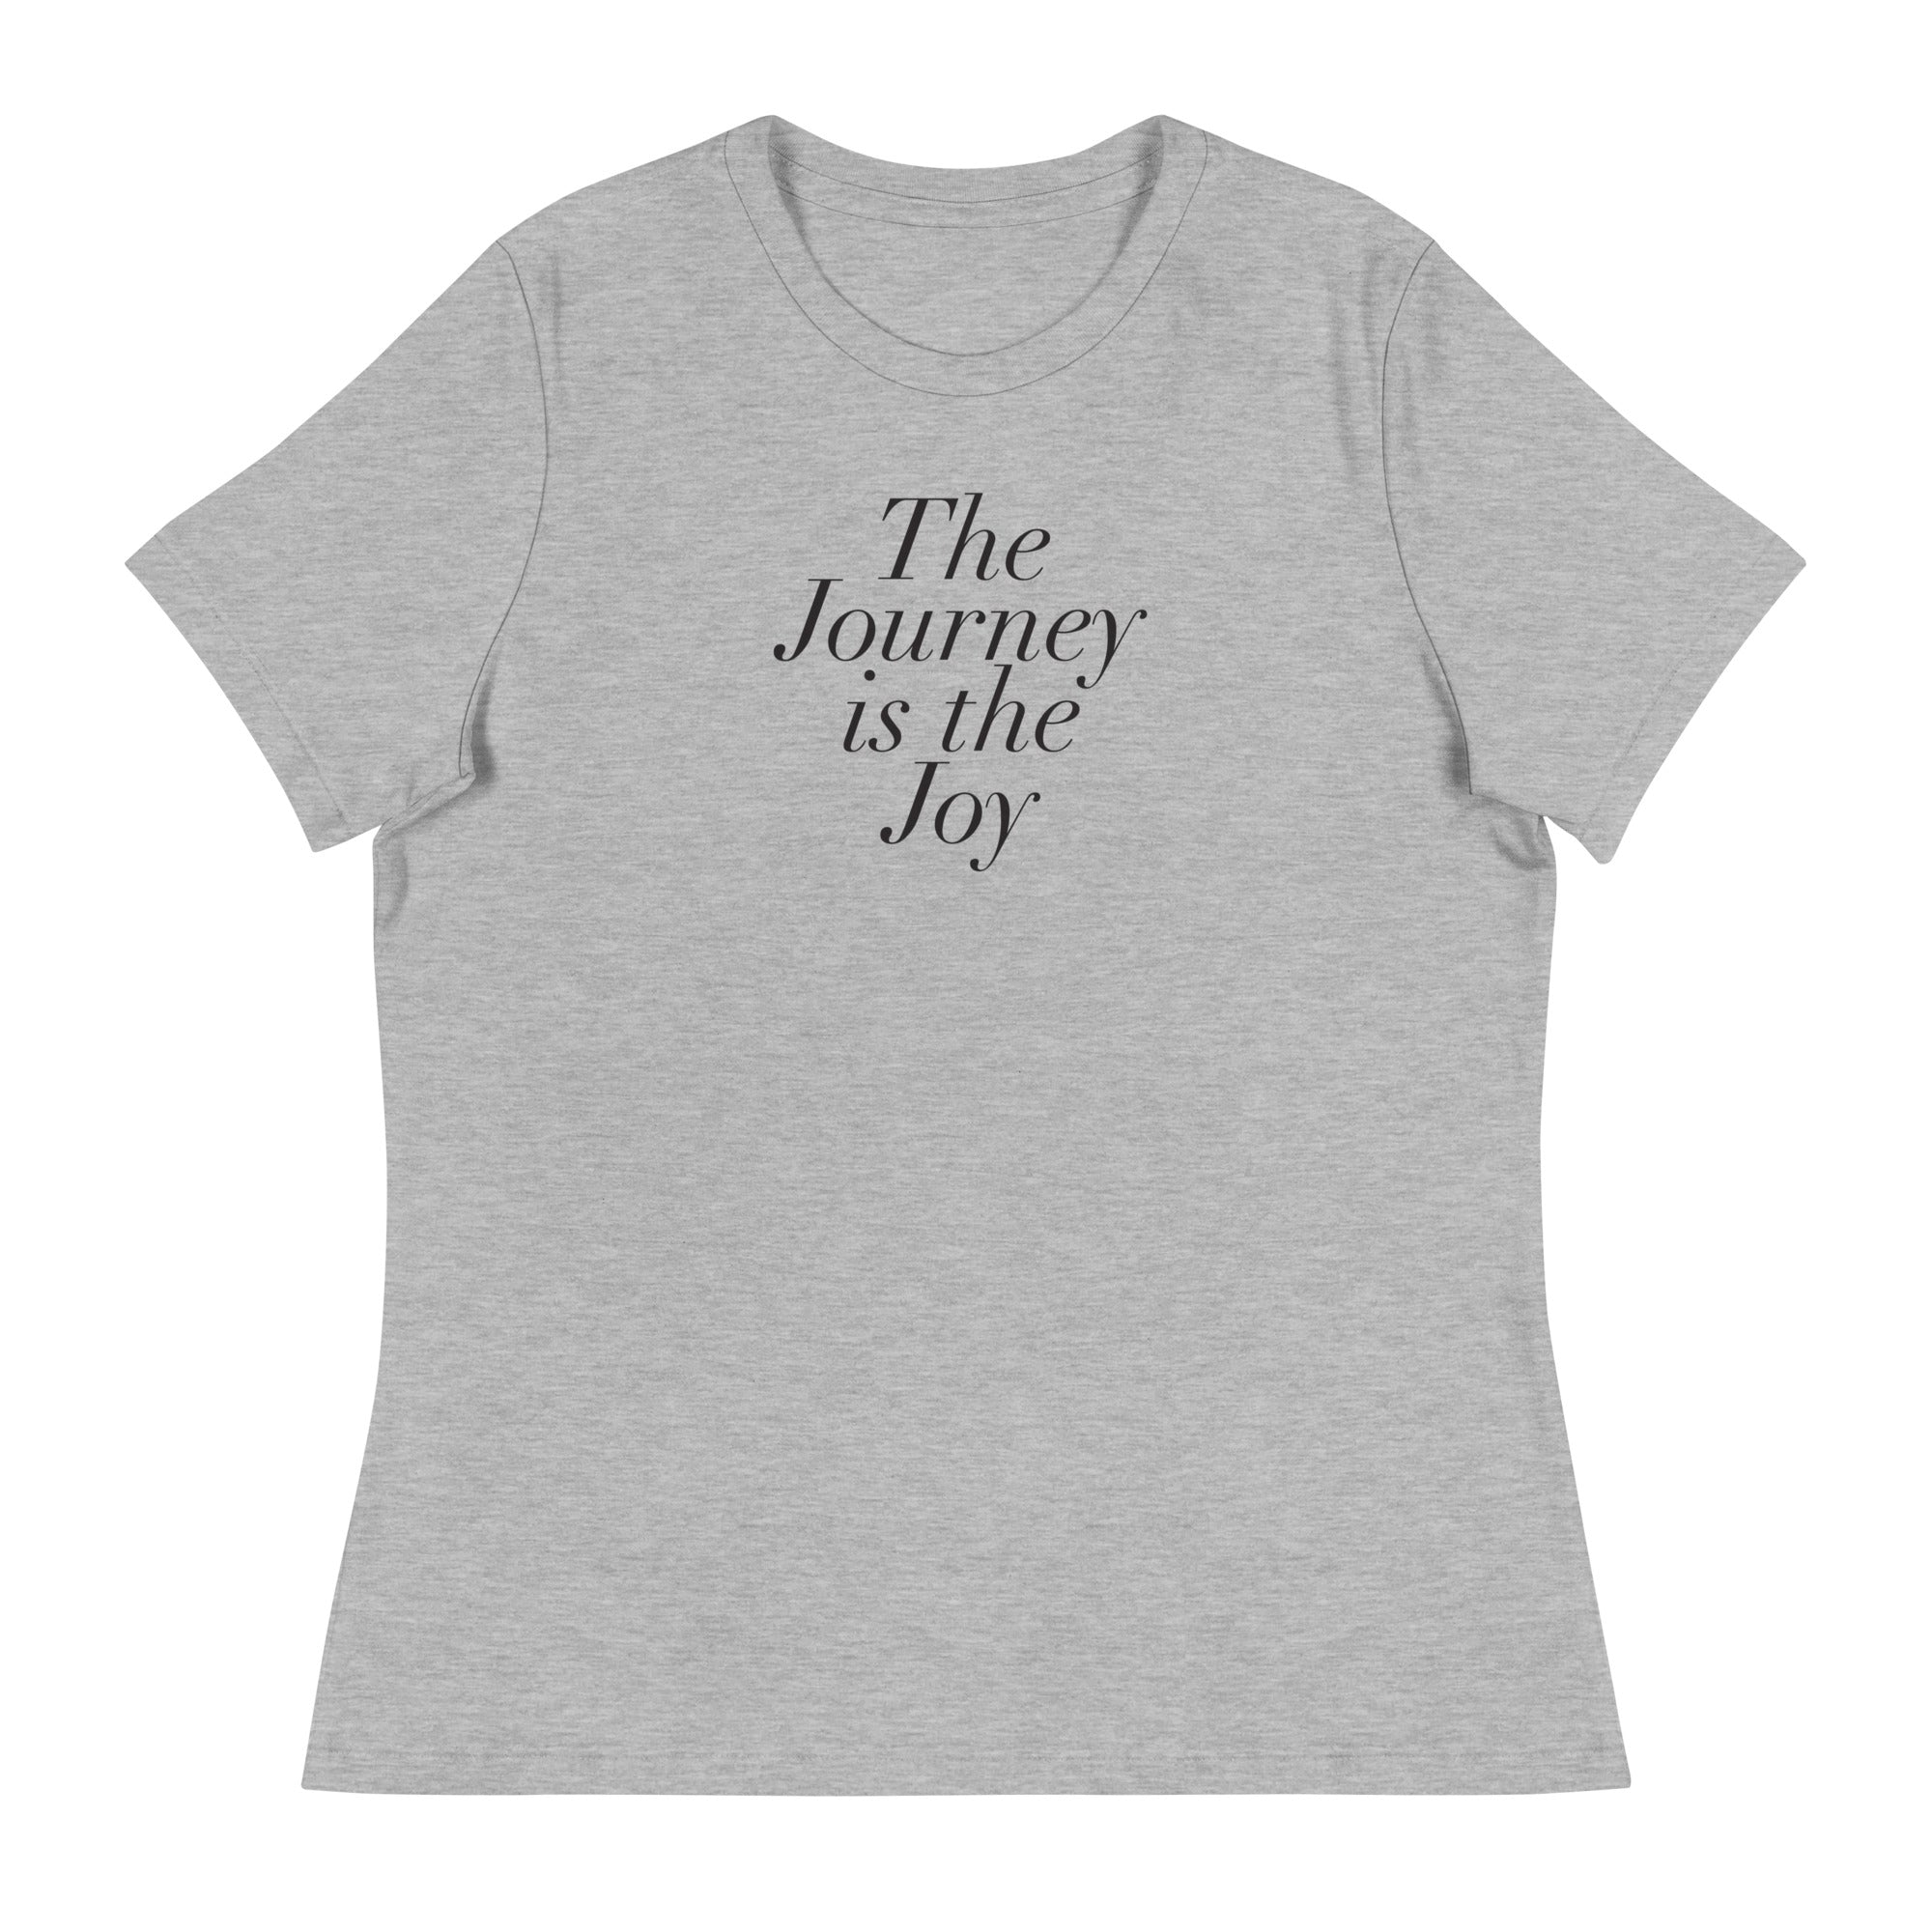 The Journey is the Joy - Women's Relaxed T-Shirt in Athletic Heather and White